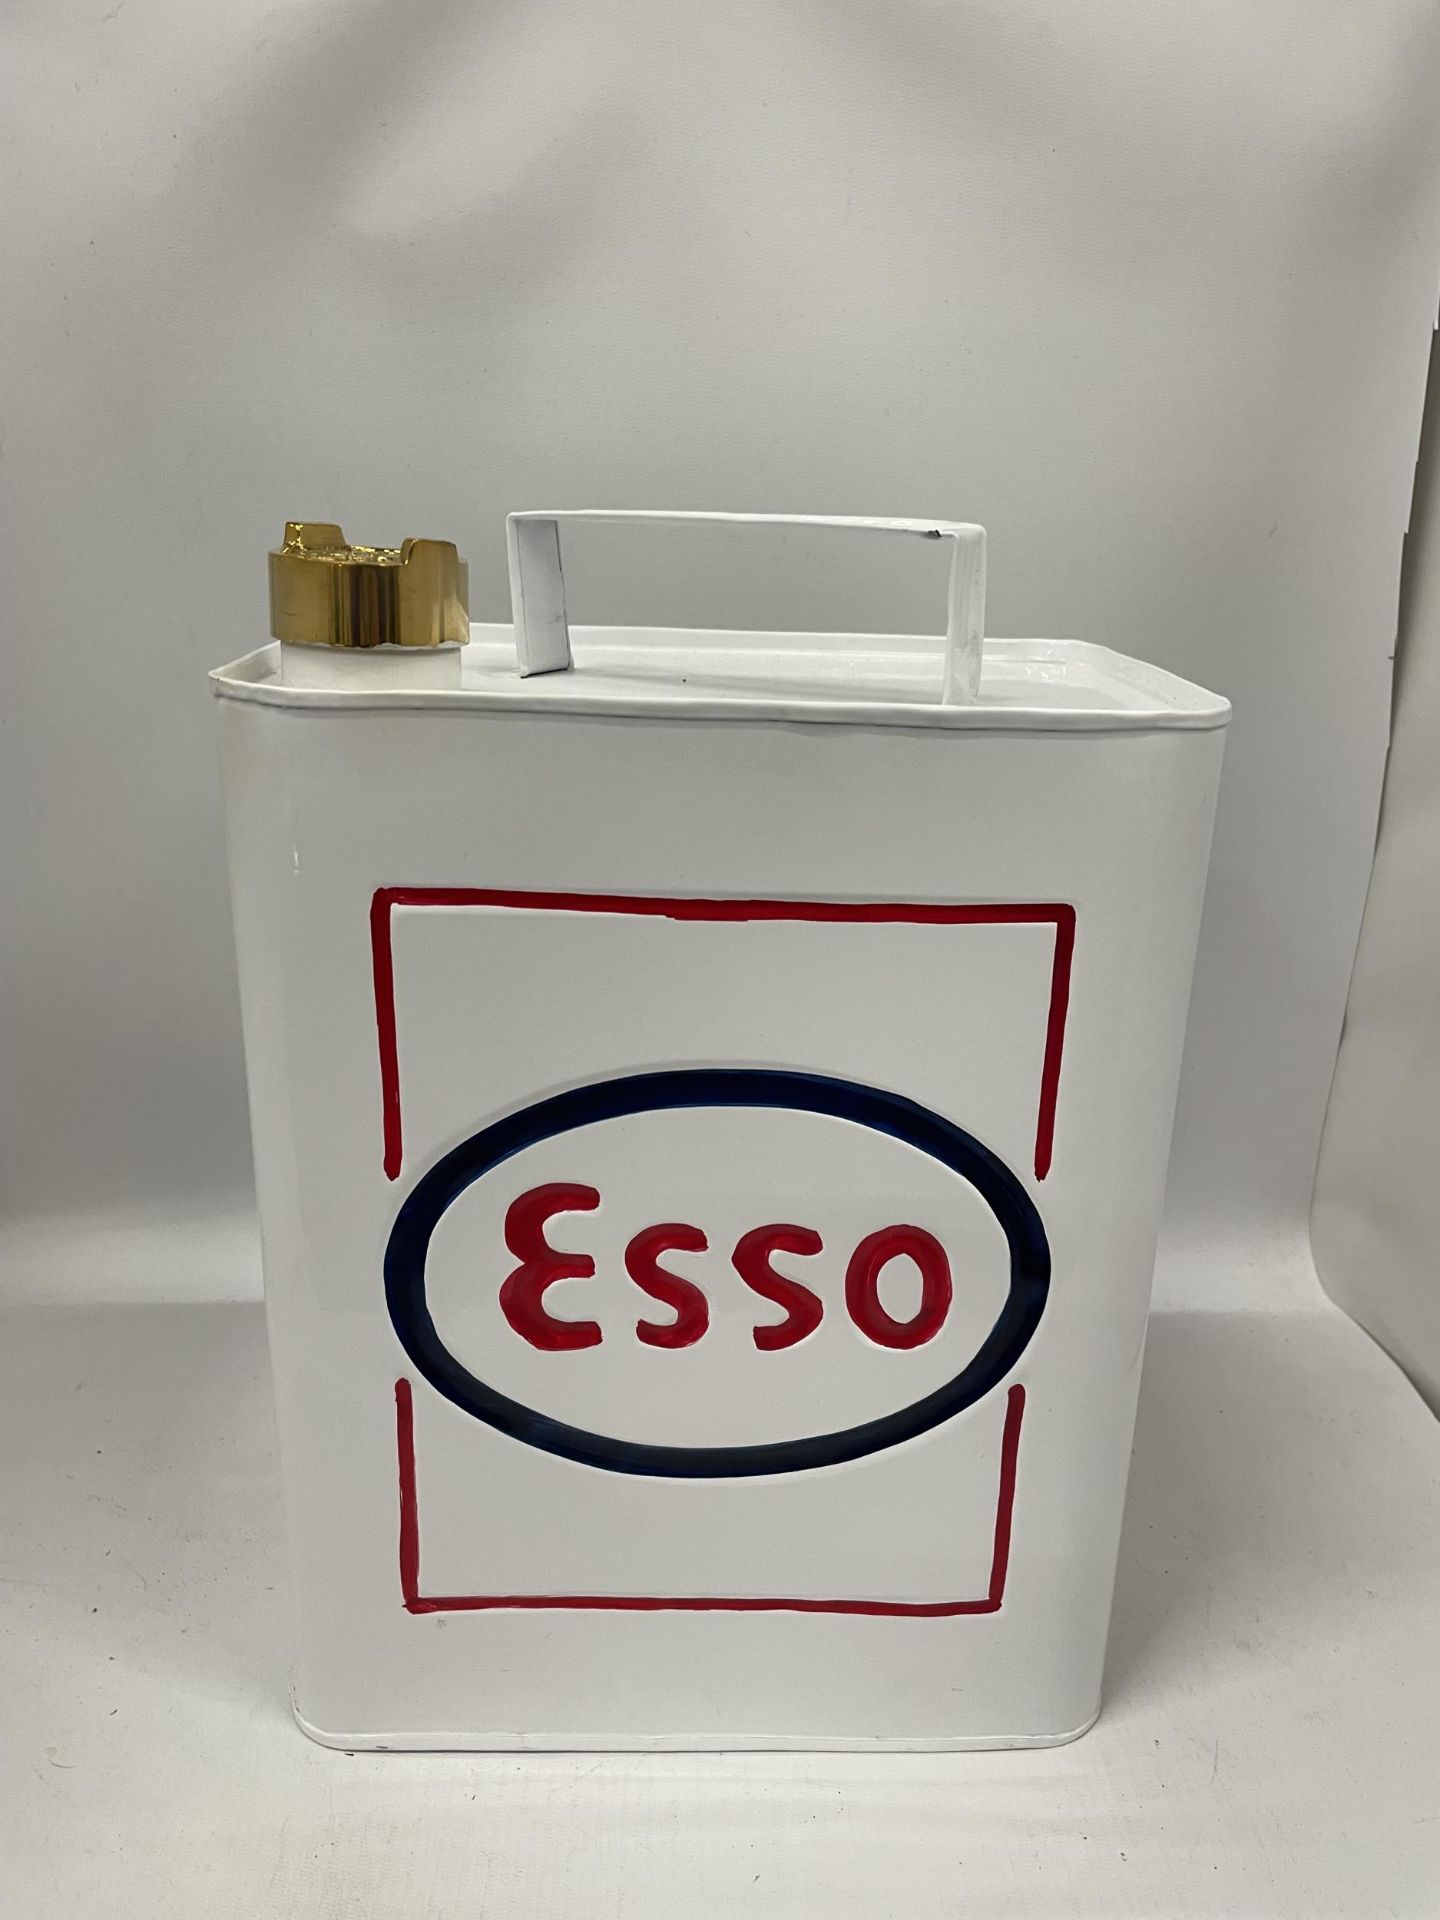 A WHITE ESSO PETROL CAN WITH BRASS TOP